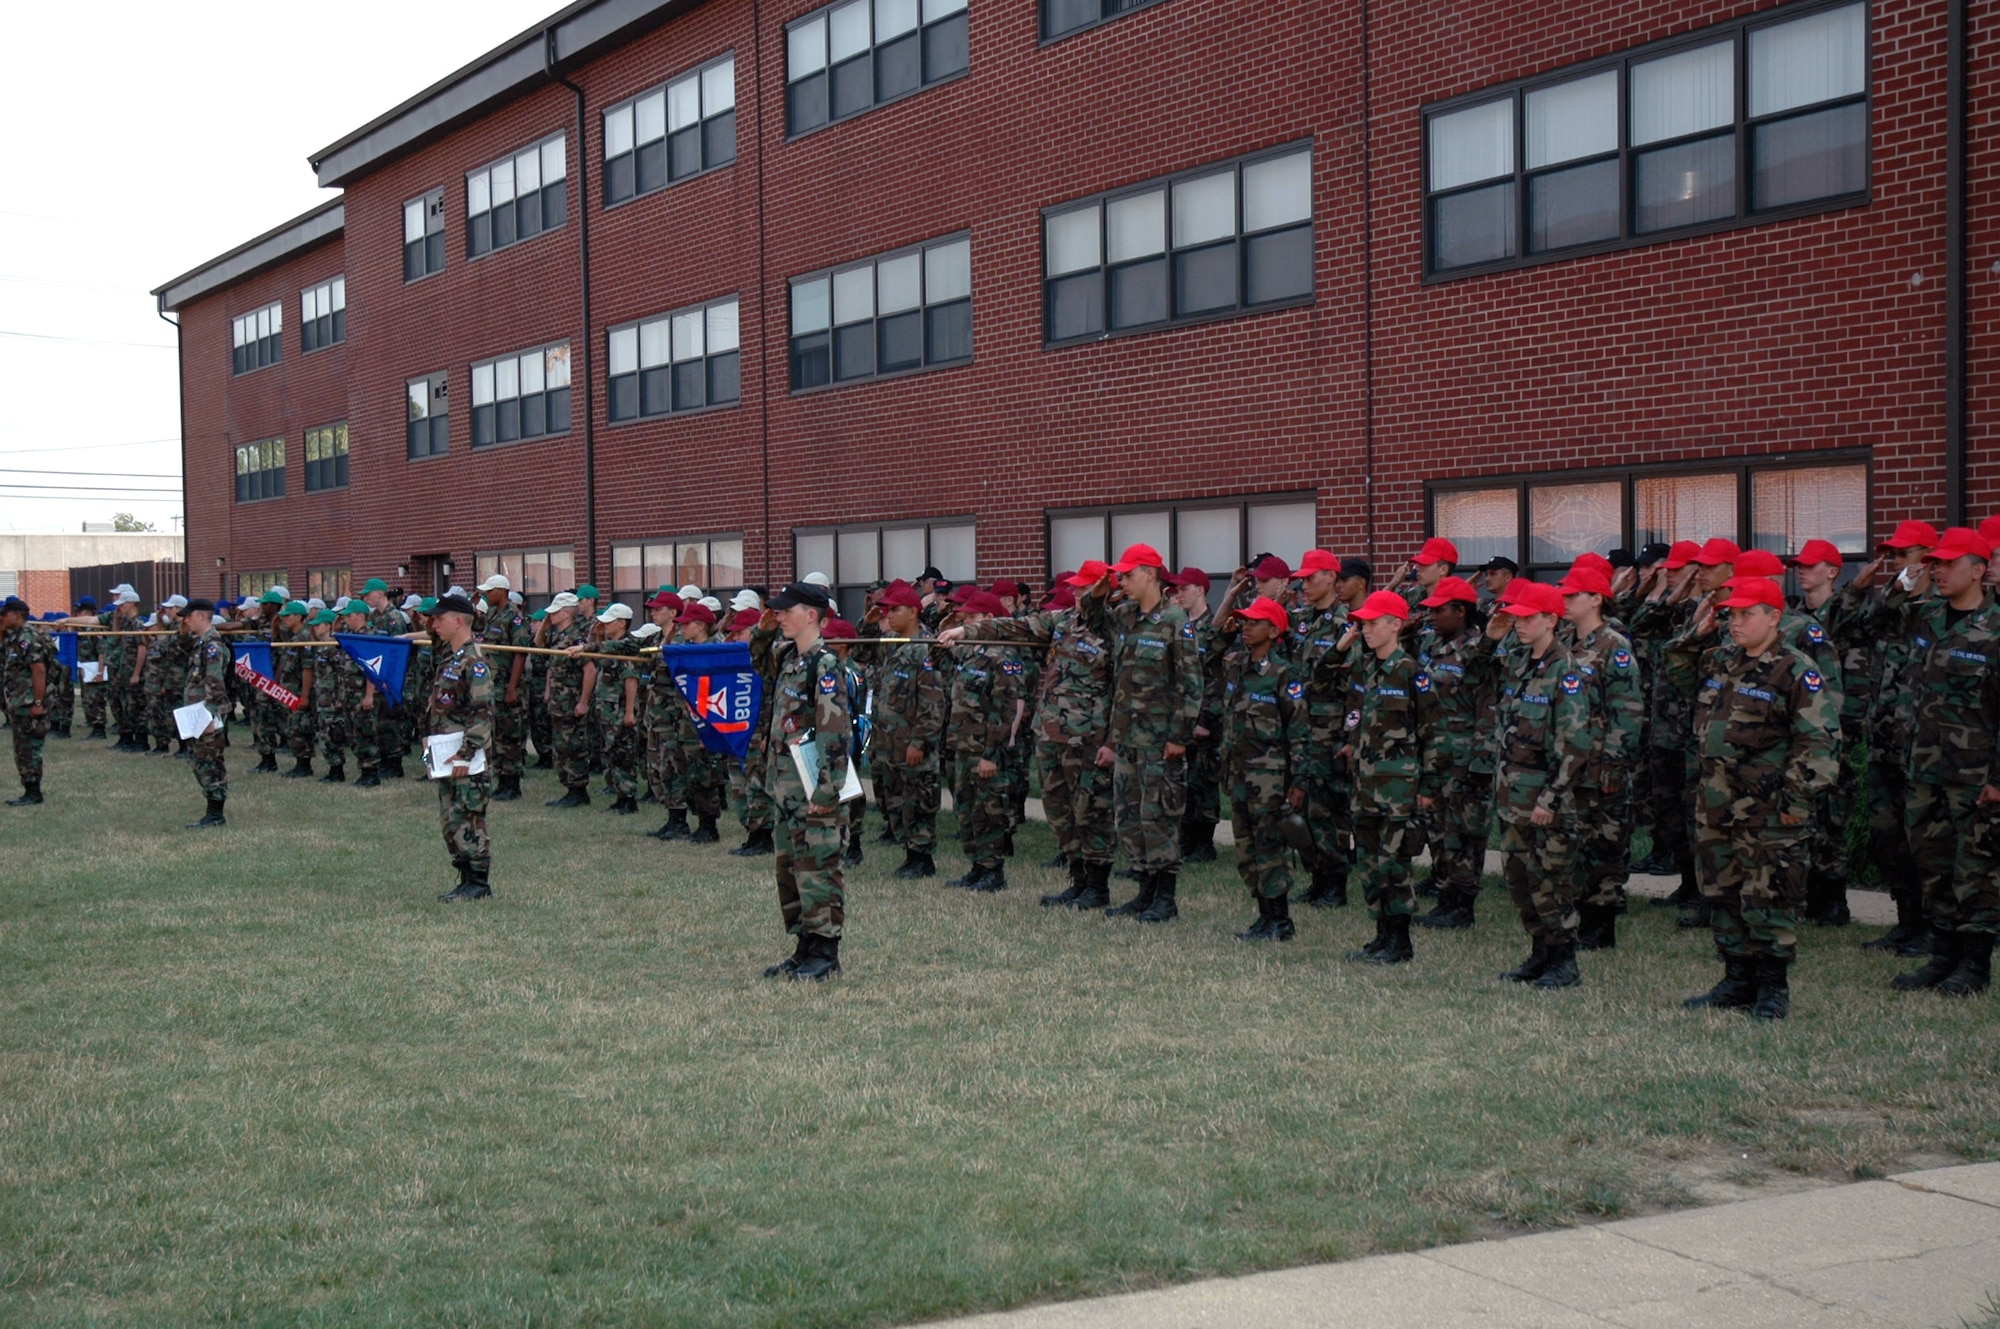 Civil Air Patrol cadets from the New Jersey Civil Air Patrol Wing participate in a retreat ceremony marking the end of their duty day at the U.S. Air Force Expeditionary Center on Fort Dix, N.J., July 29, 2008.  Civil Air Patrol is a volunteer, non-profit auxiliary of the U.S. Air Force. Its missions are to develop its cadets, educate Americans on the importance of aviation and space, and perform life saving humanitarian missions. These cadets were holding their annual summer encampment with the New Jersey wing.  (U.S. Air Force photo/Staff Sgt. Paul R. Evans)